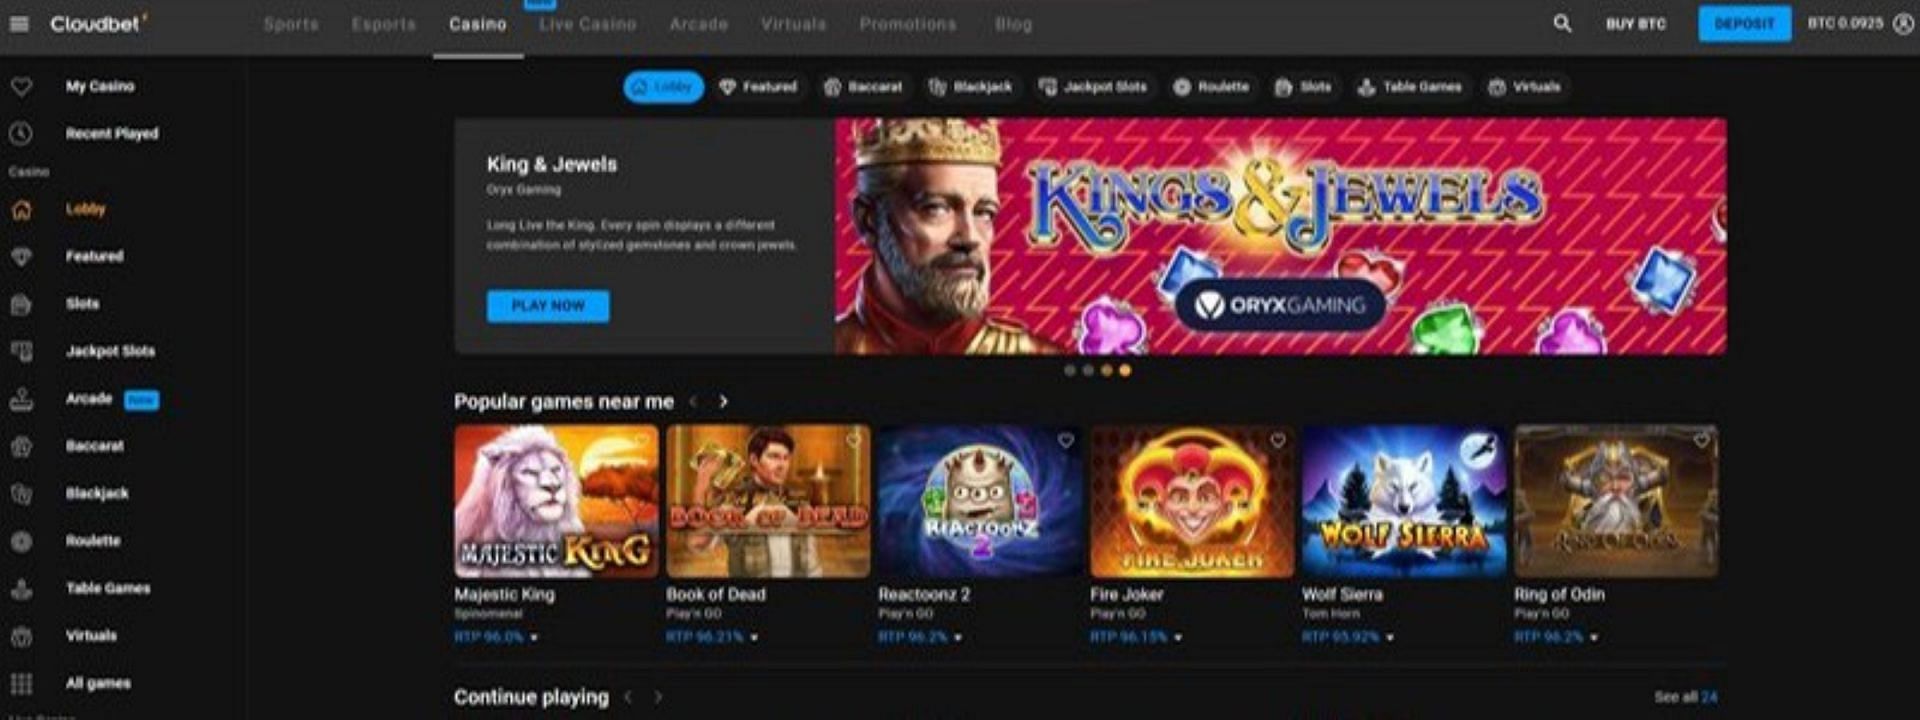 CloudBet is arguably the best for High RTP Games